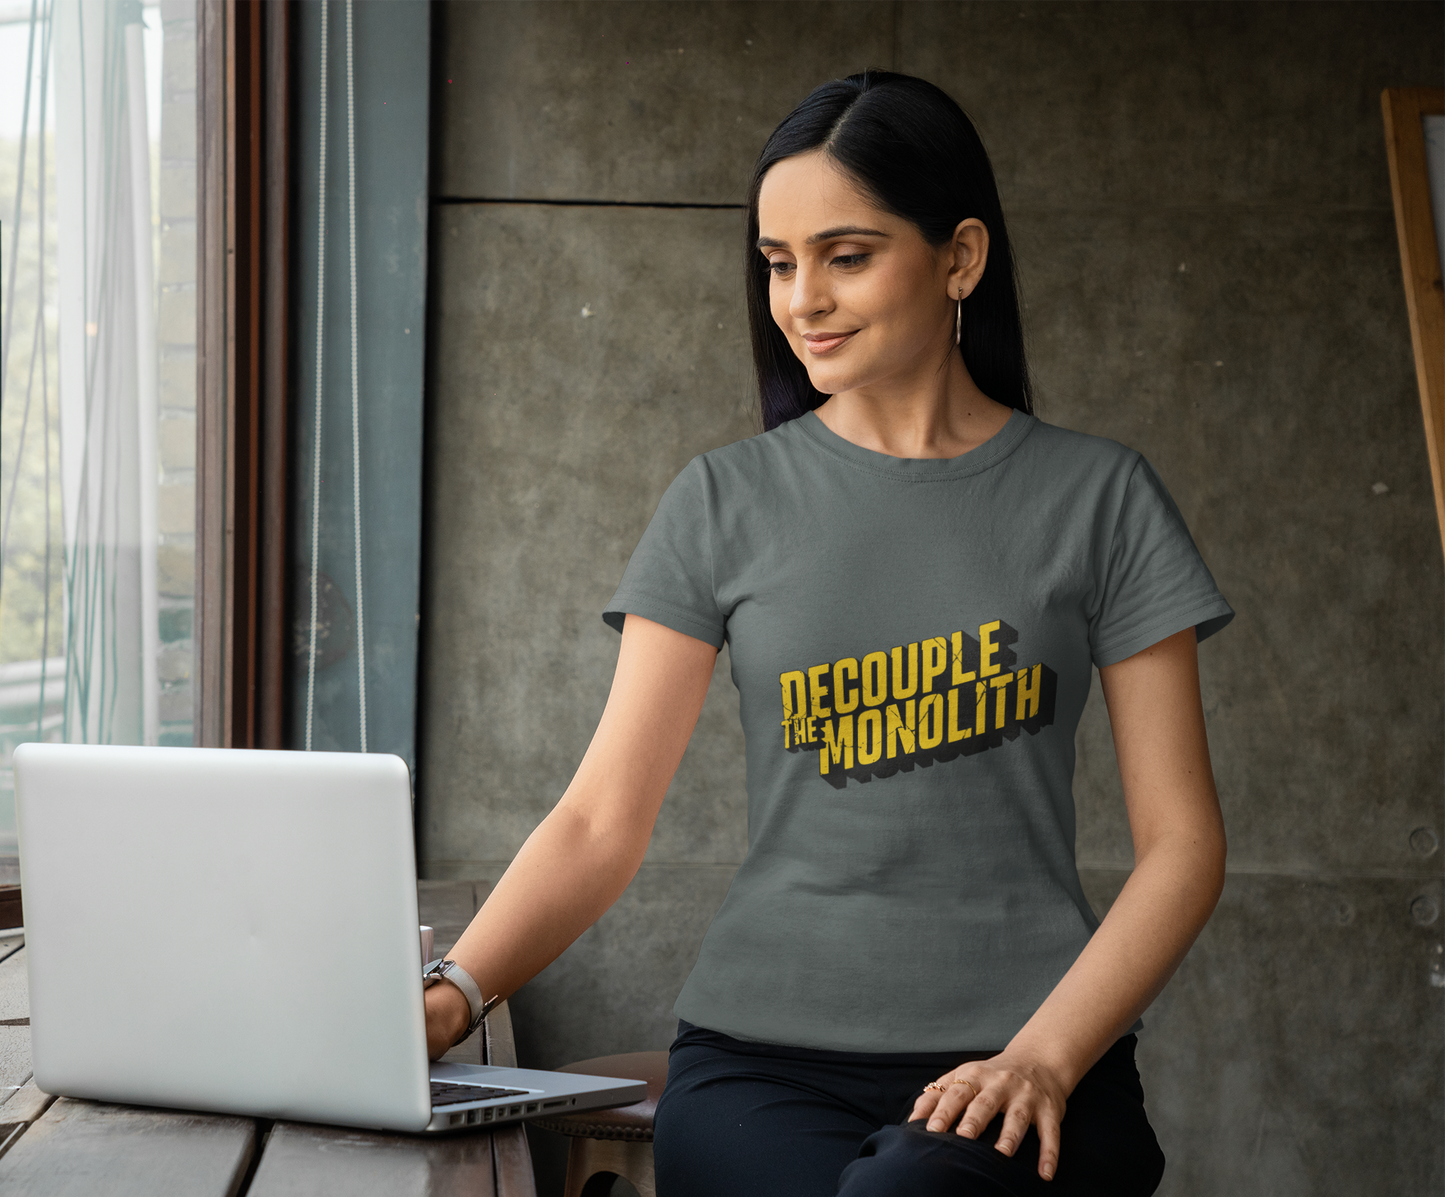 geek-themed tshirts expressing love for programming